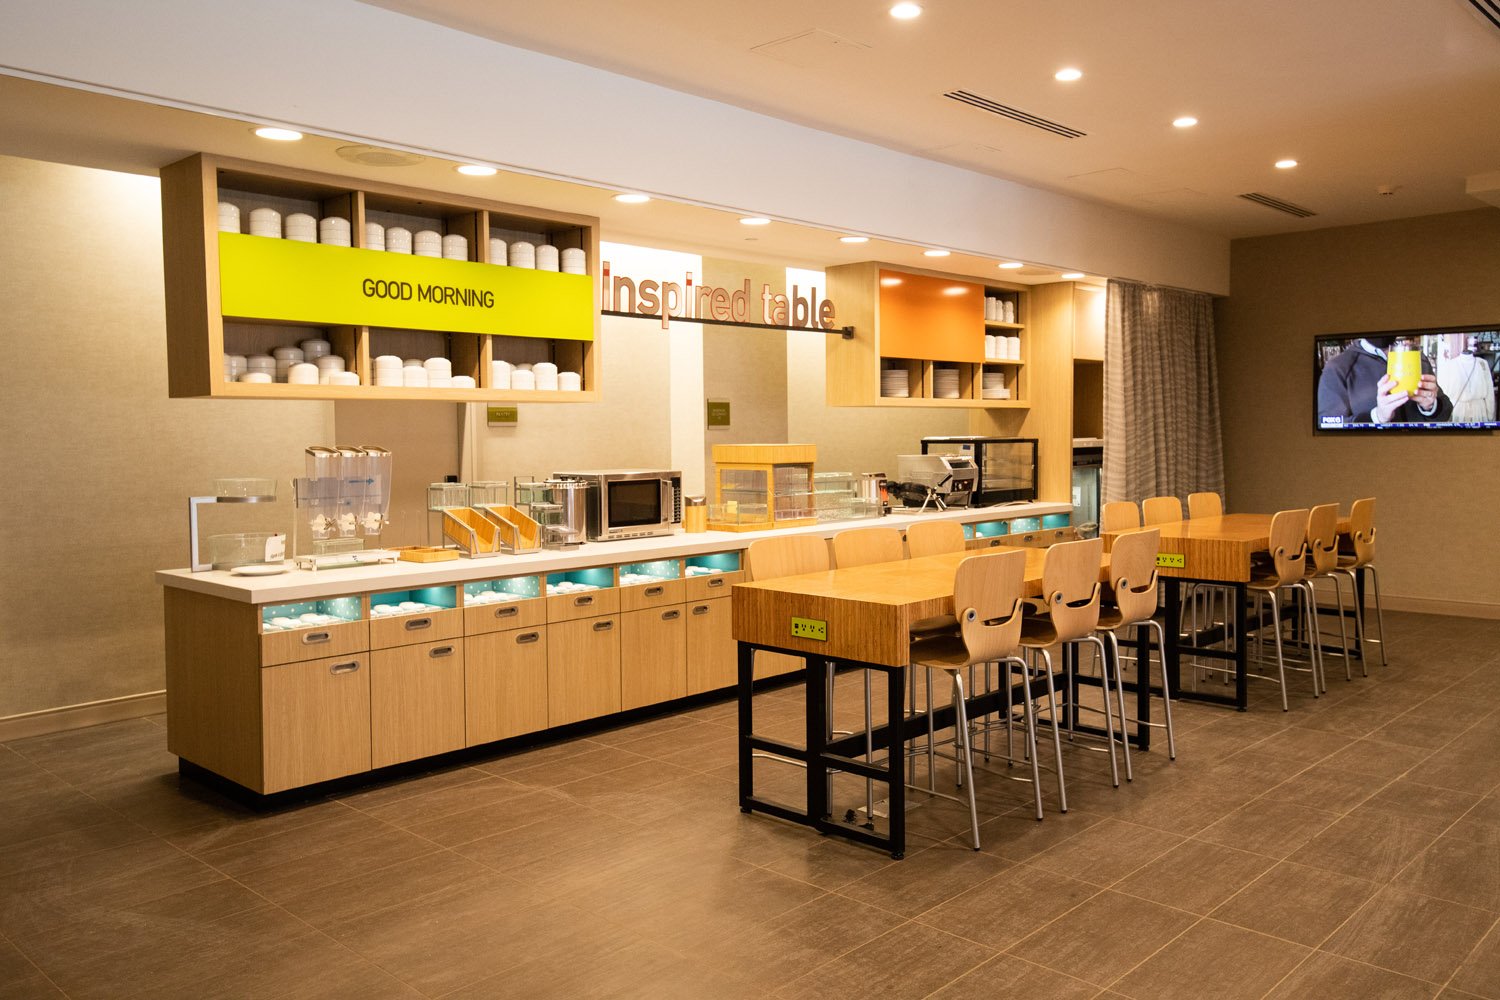 Home2 Suites by Hilton and Tru by Hilton breakfast bar featuring custom millwork, storage, and counters